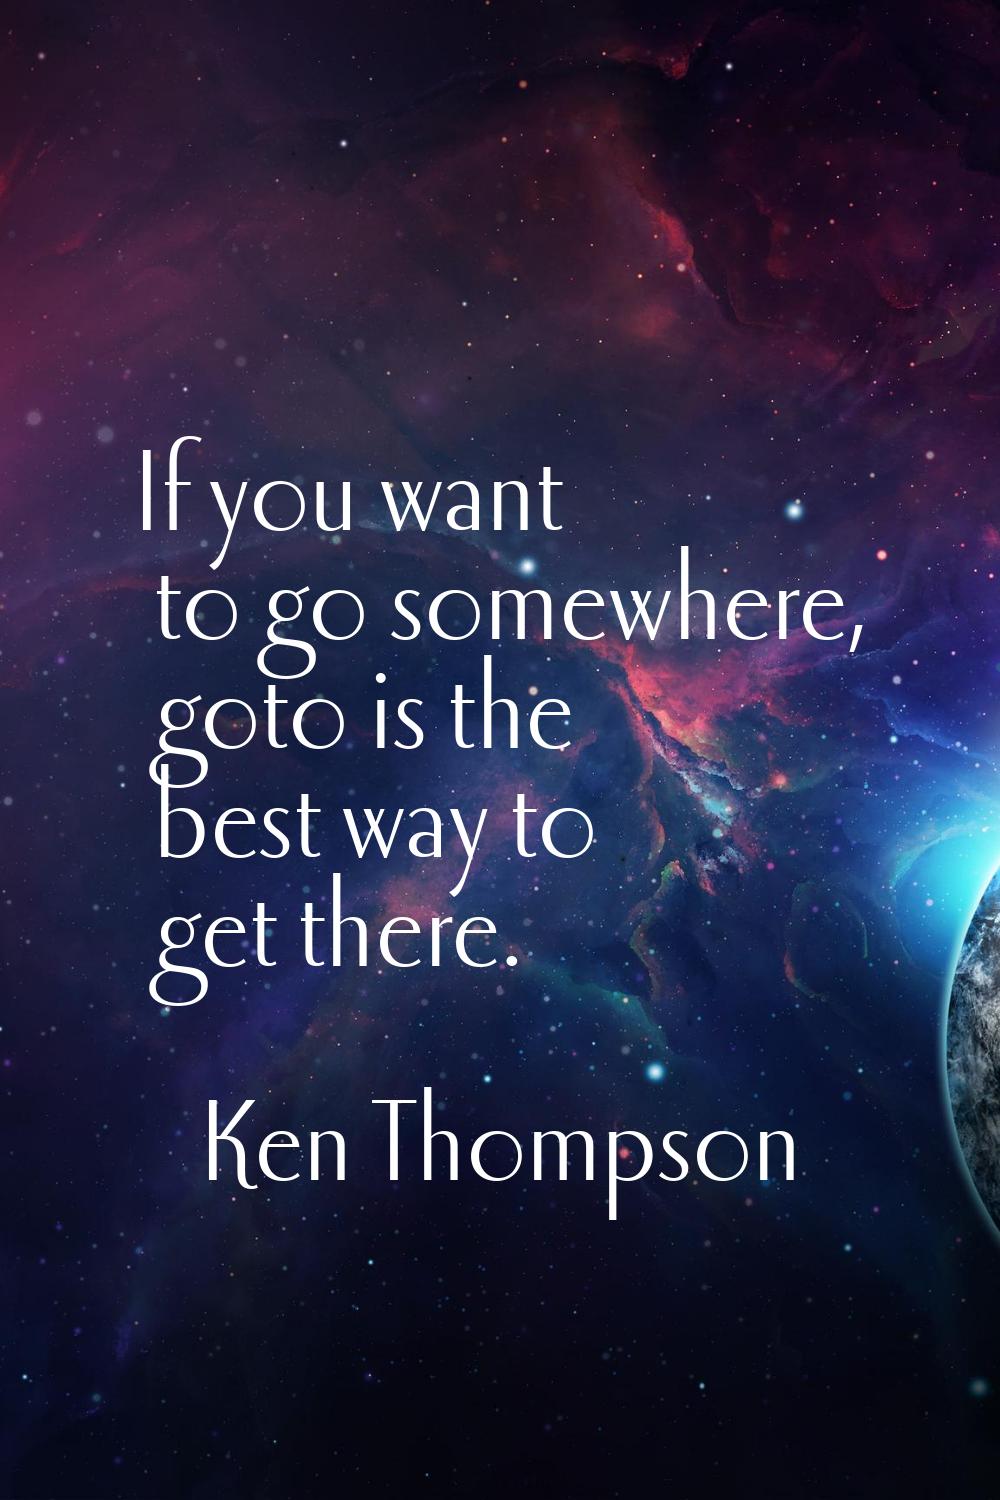 If you want to go somewhere, goto is the best way to get there.